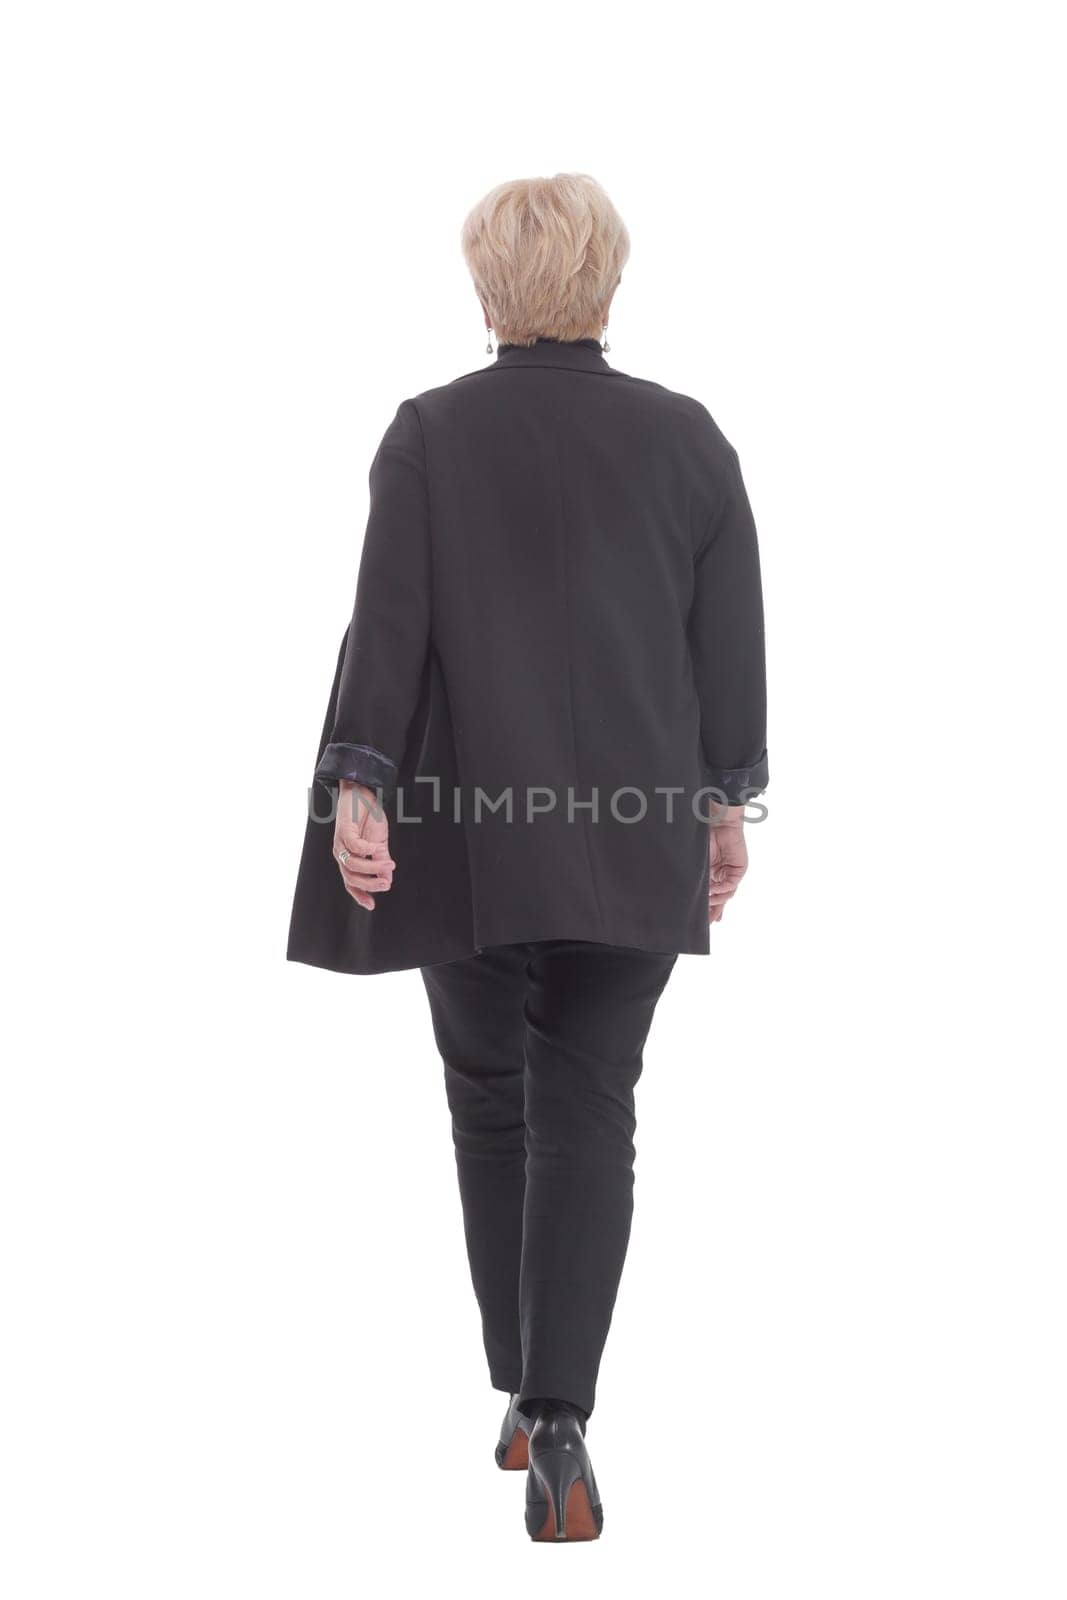 in full growth.confident business woman striding forward. isolated on a white background.